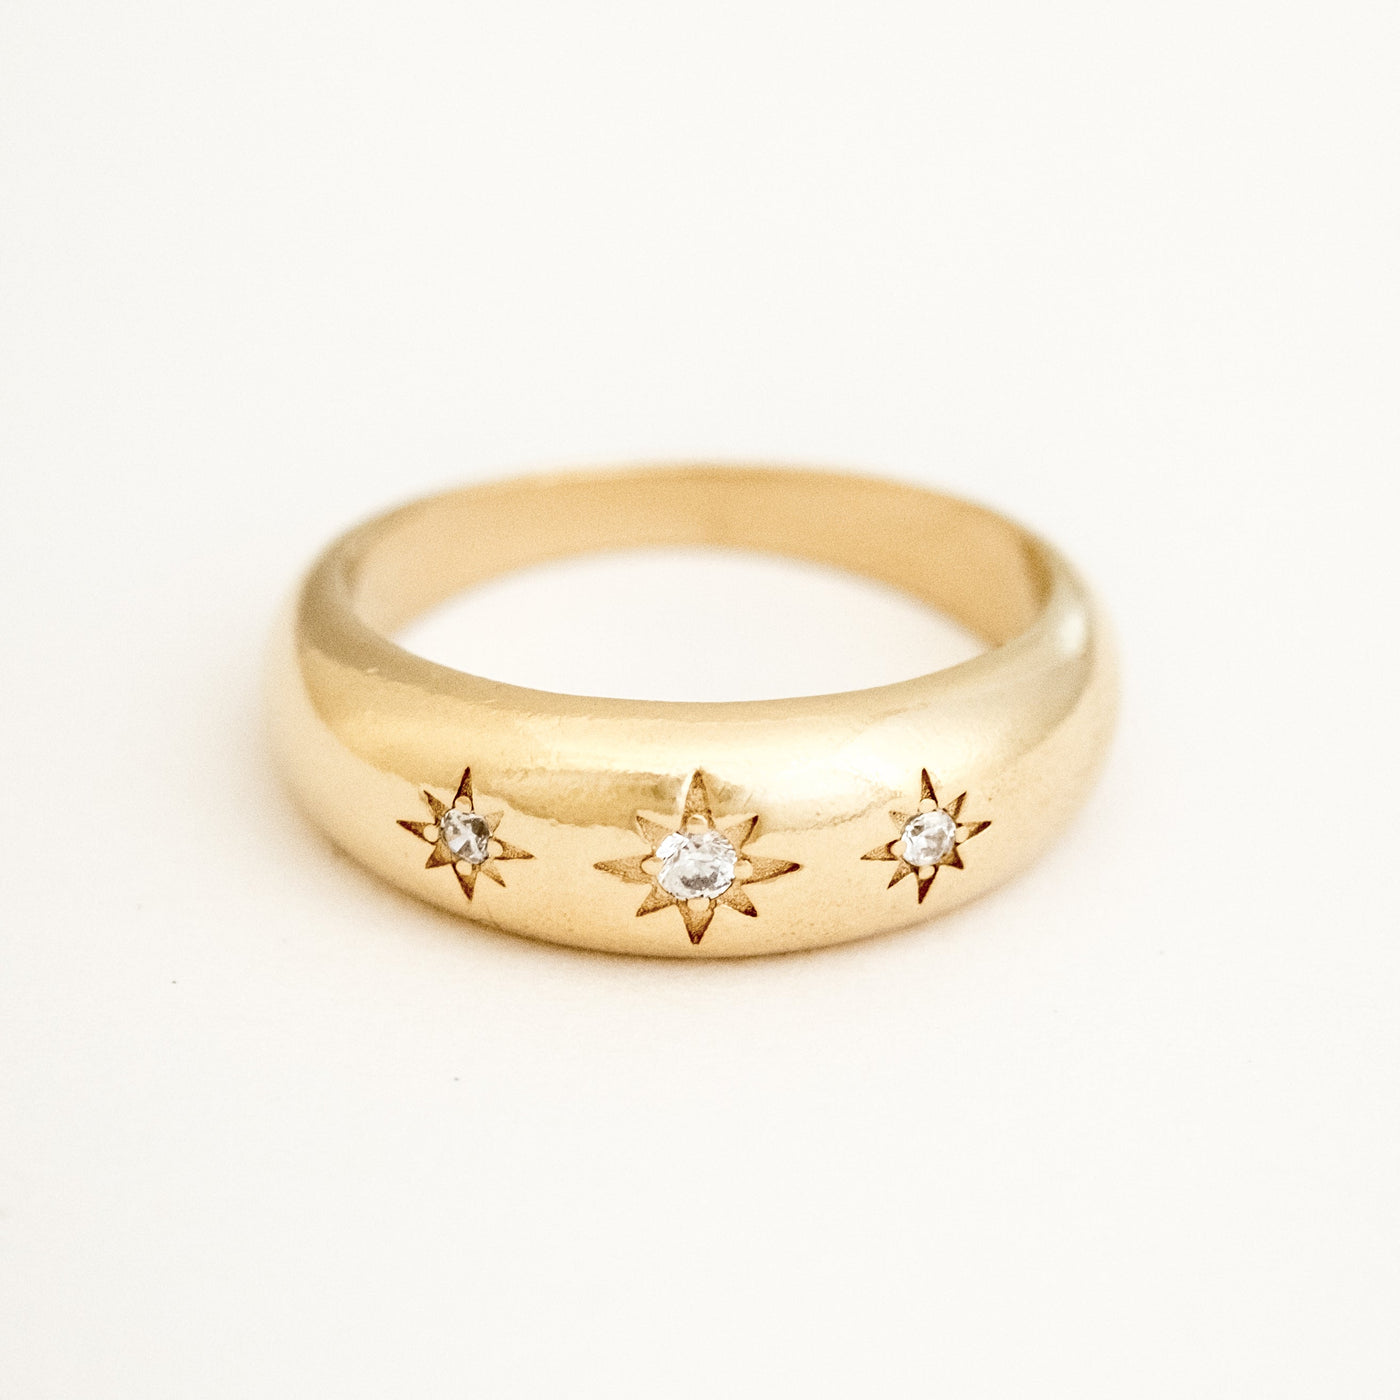 Starburst Dome Ring | Simple & Dainty Jewelry